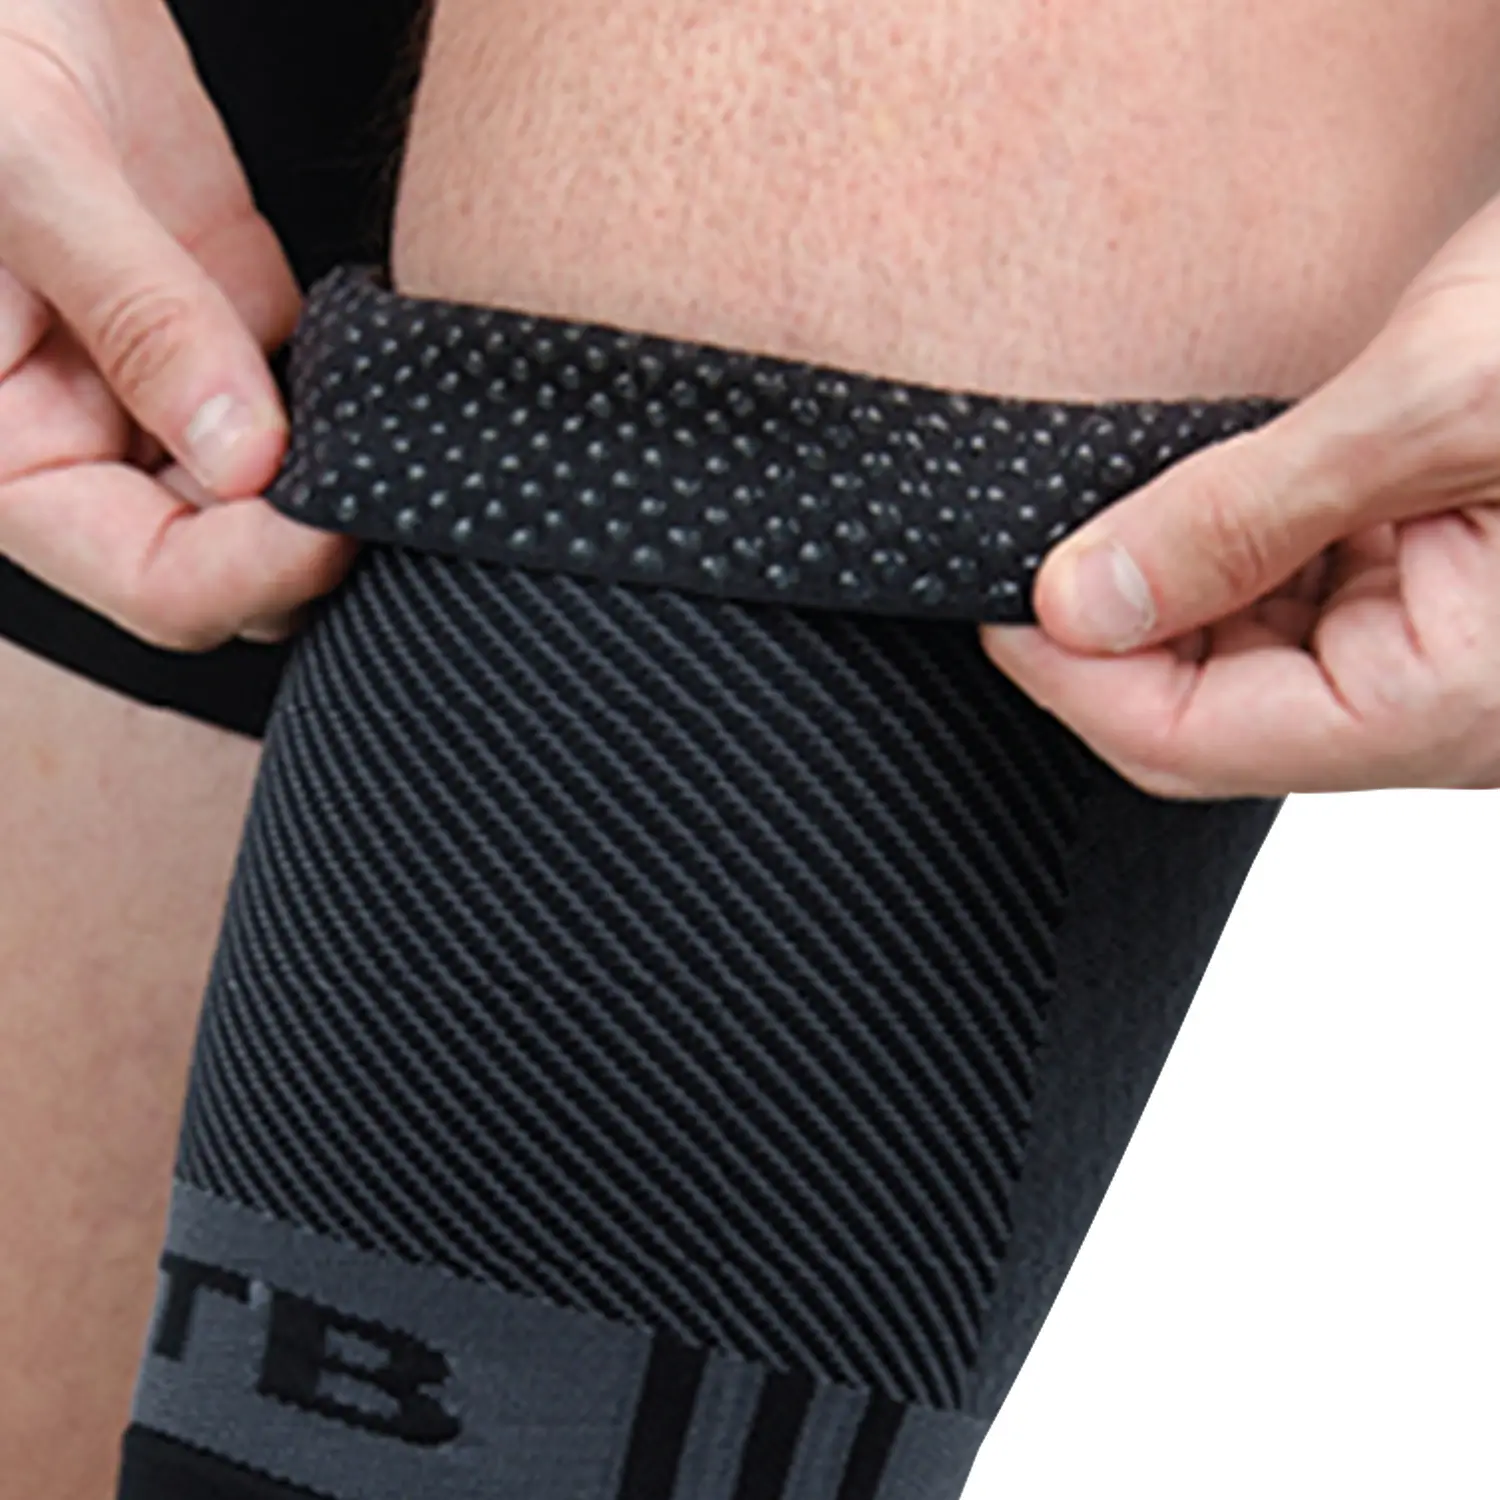 Best Braces & Supports for Iliotibial Band Syndrome